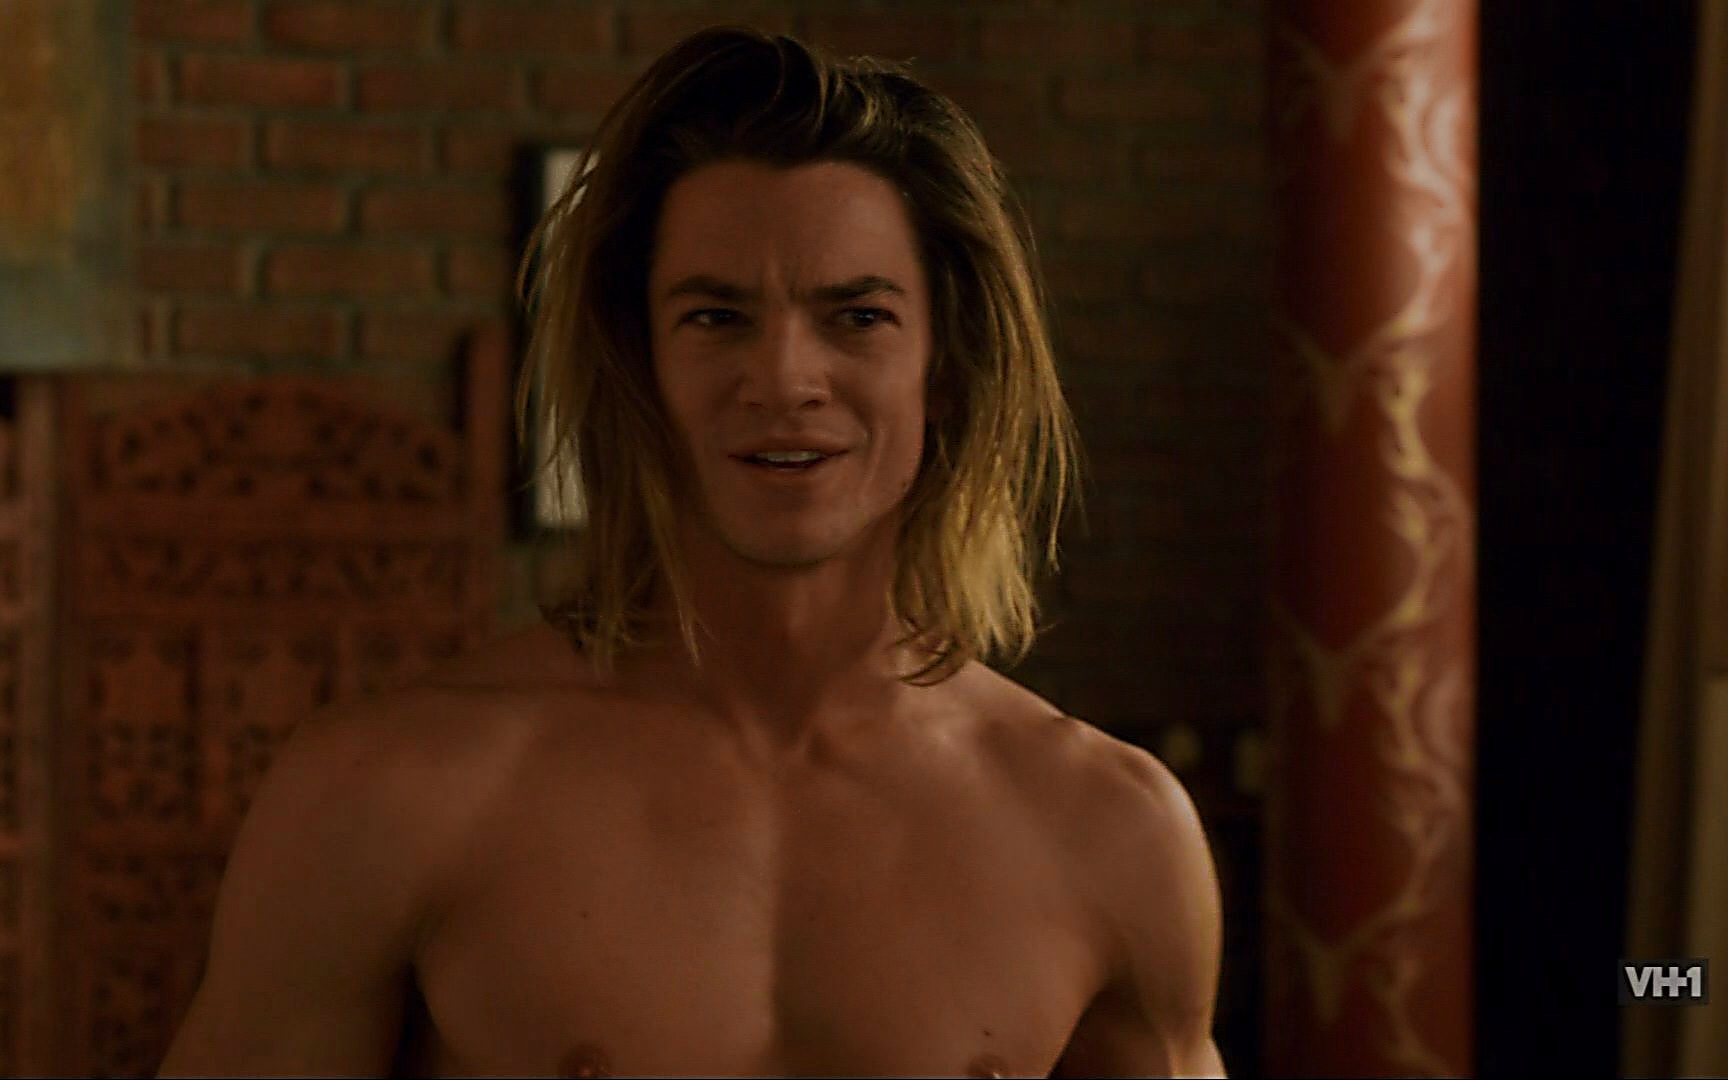 Craig horner movies and tv shows